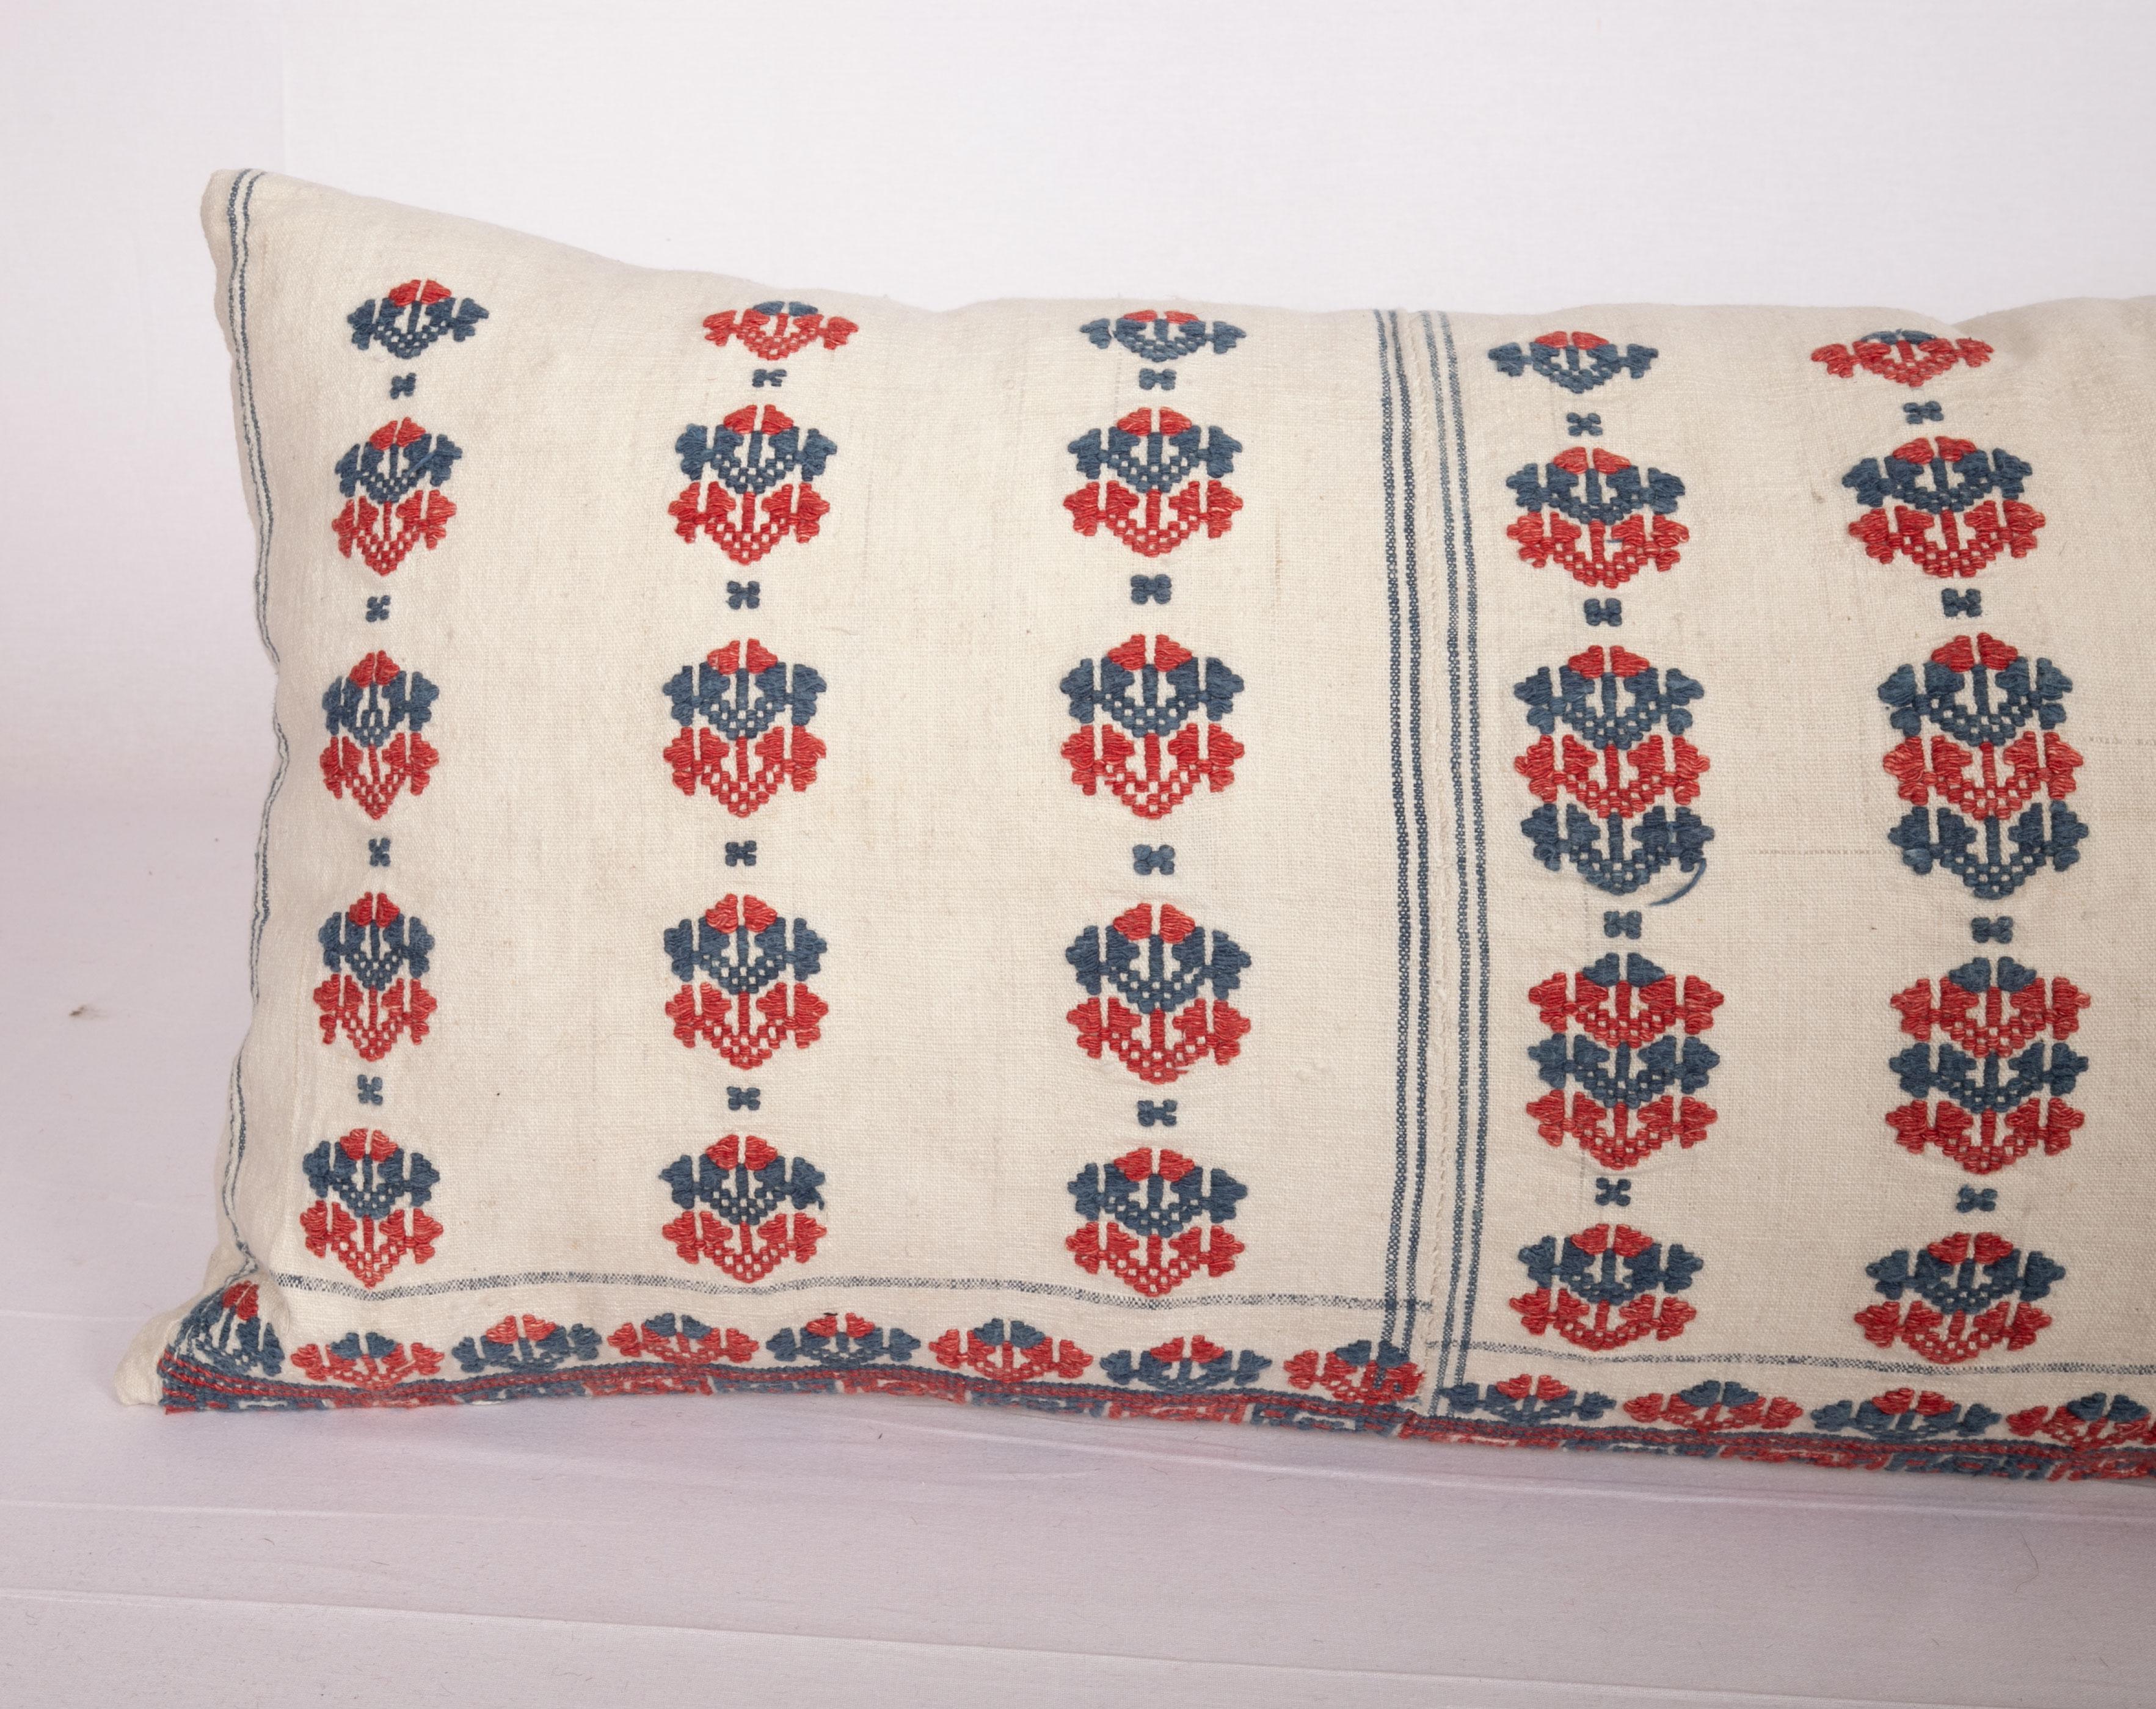 Suzani Pillow Case Made from the Skirt of a Western Anatolian Dress, Early 20th Century